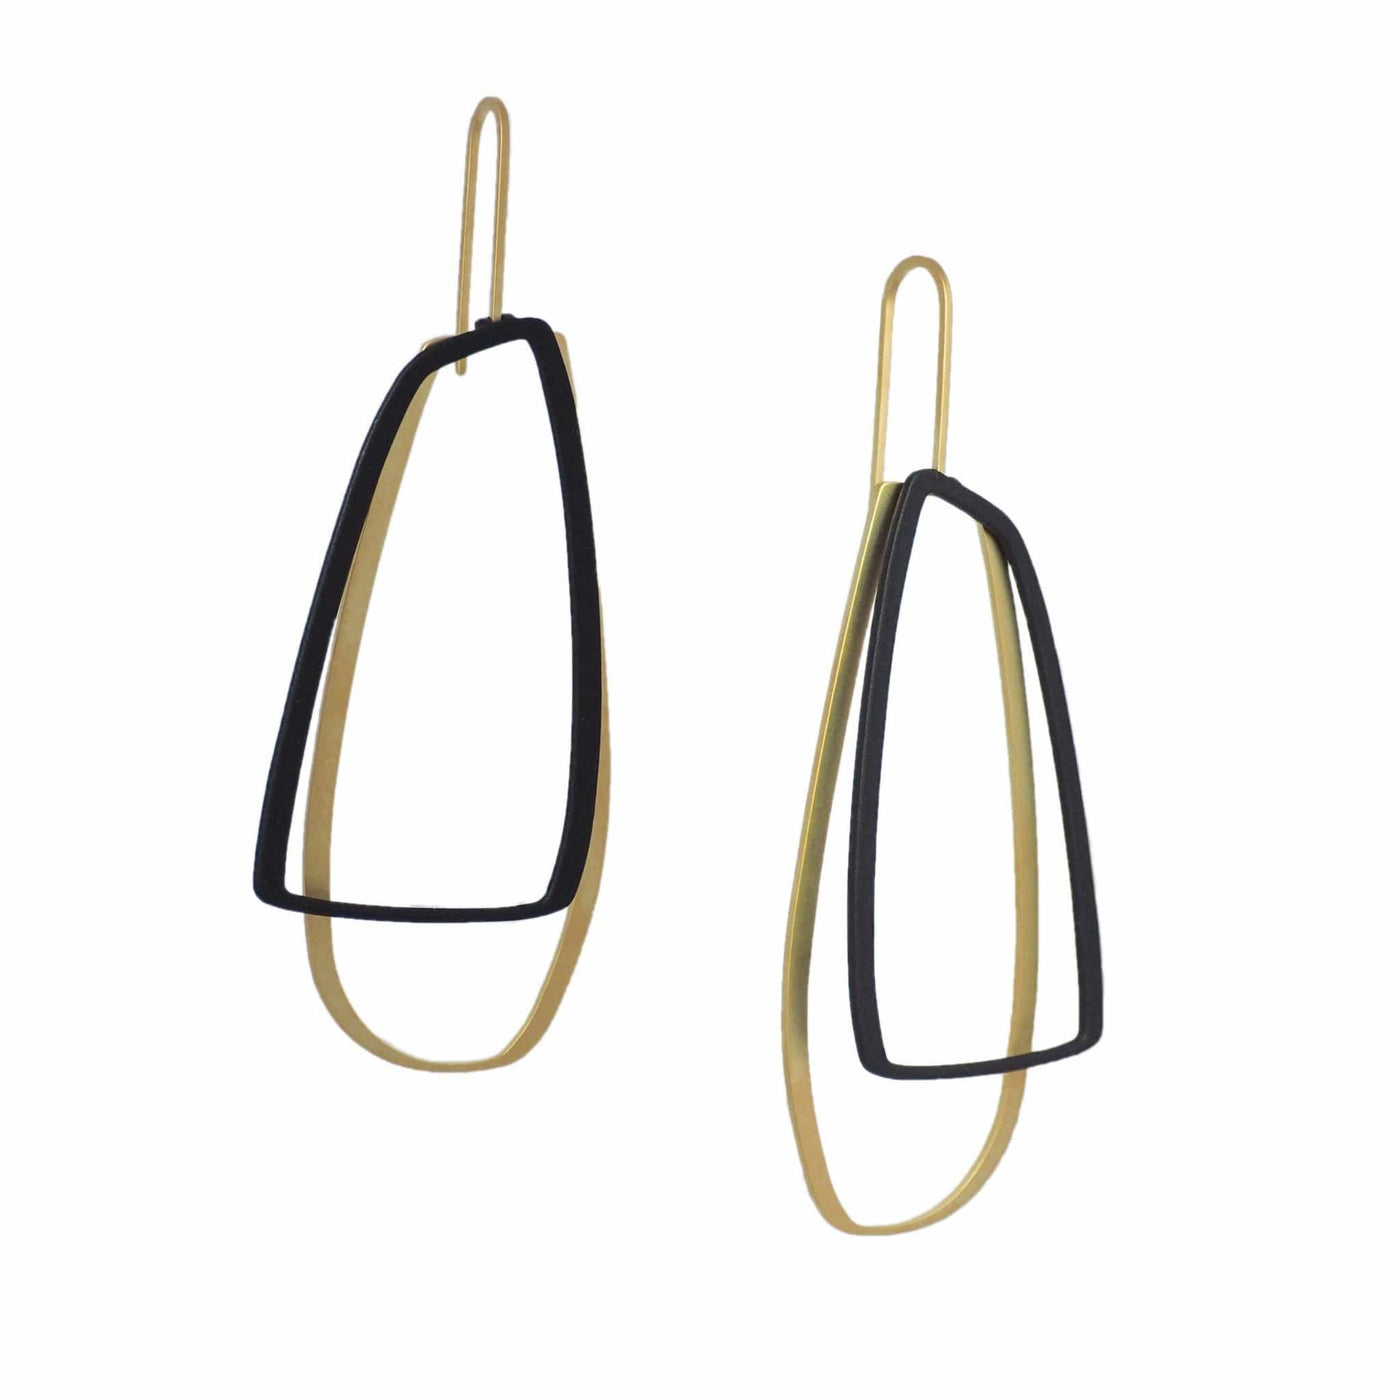 X2 Large Outline Earrings - Gold/ Raw - inSync design